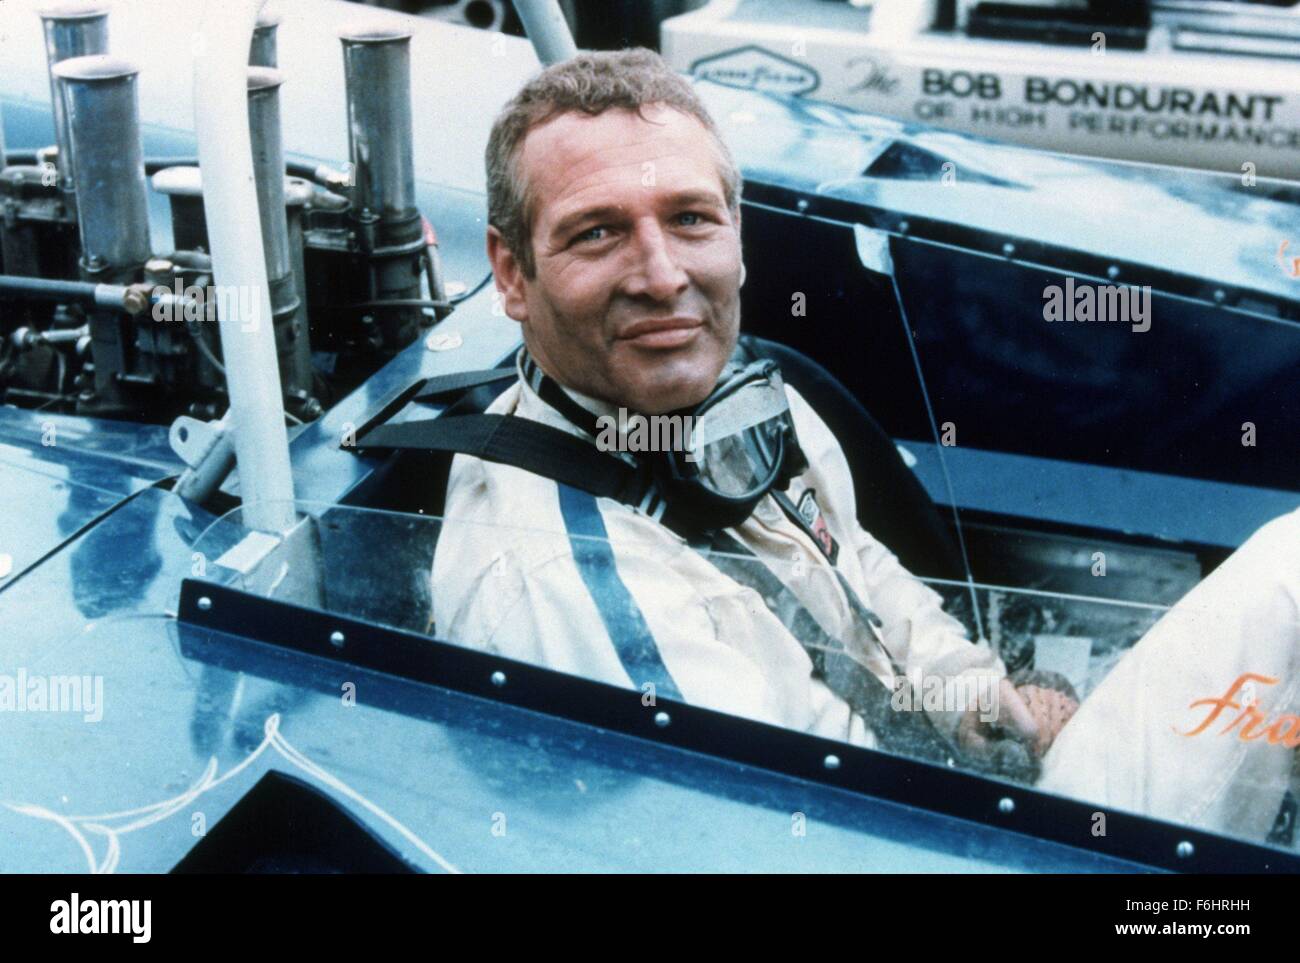 1969, Film Title: WINNING, Director: JAMES GOLDSTONE, Pictured: JAMES GOLDSTONE, PAUL NEWMAN, RACING CAR. (Credit Image: SNAP) Stock Photo